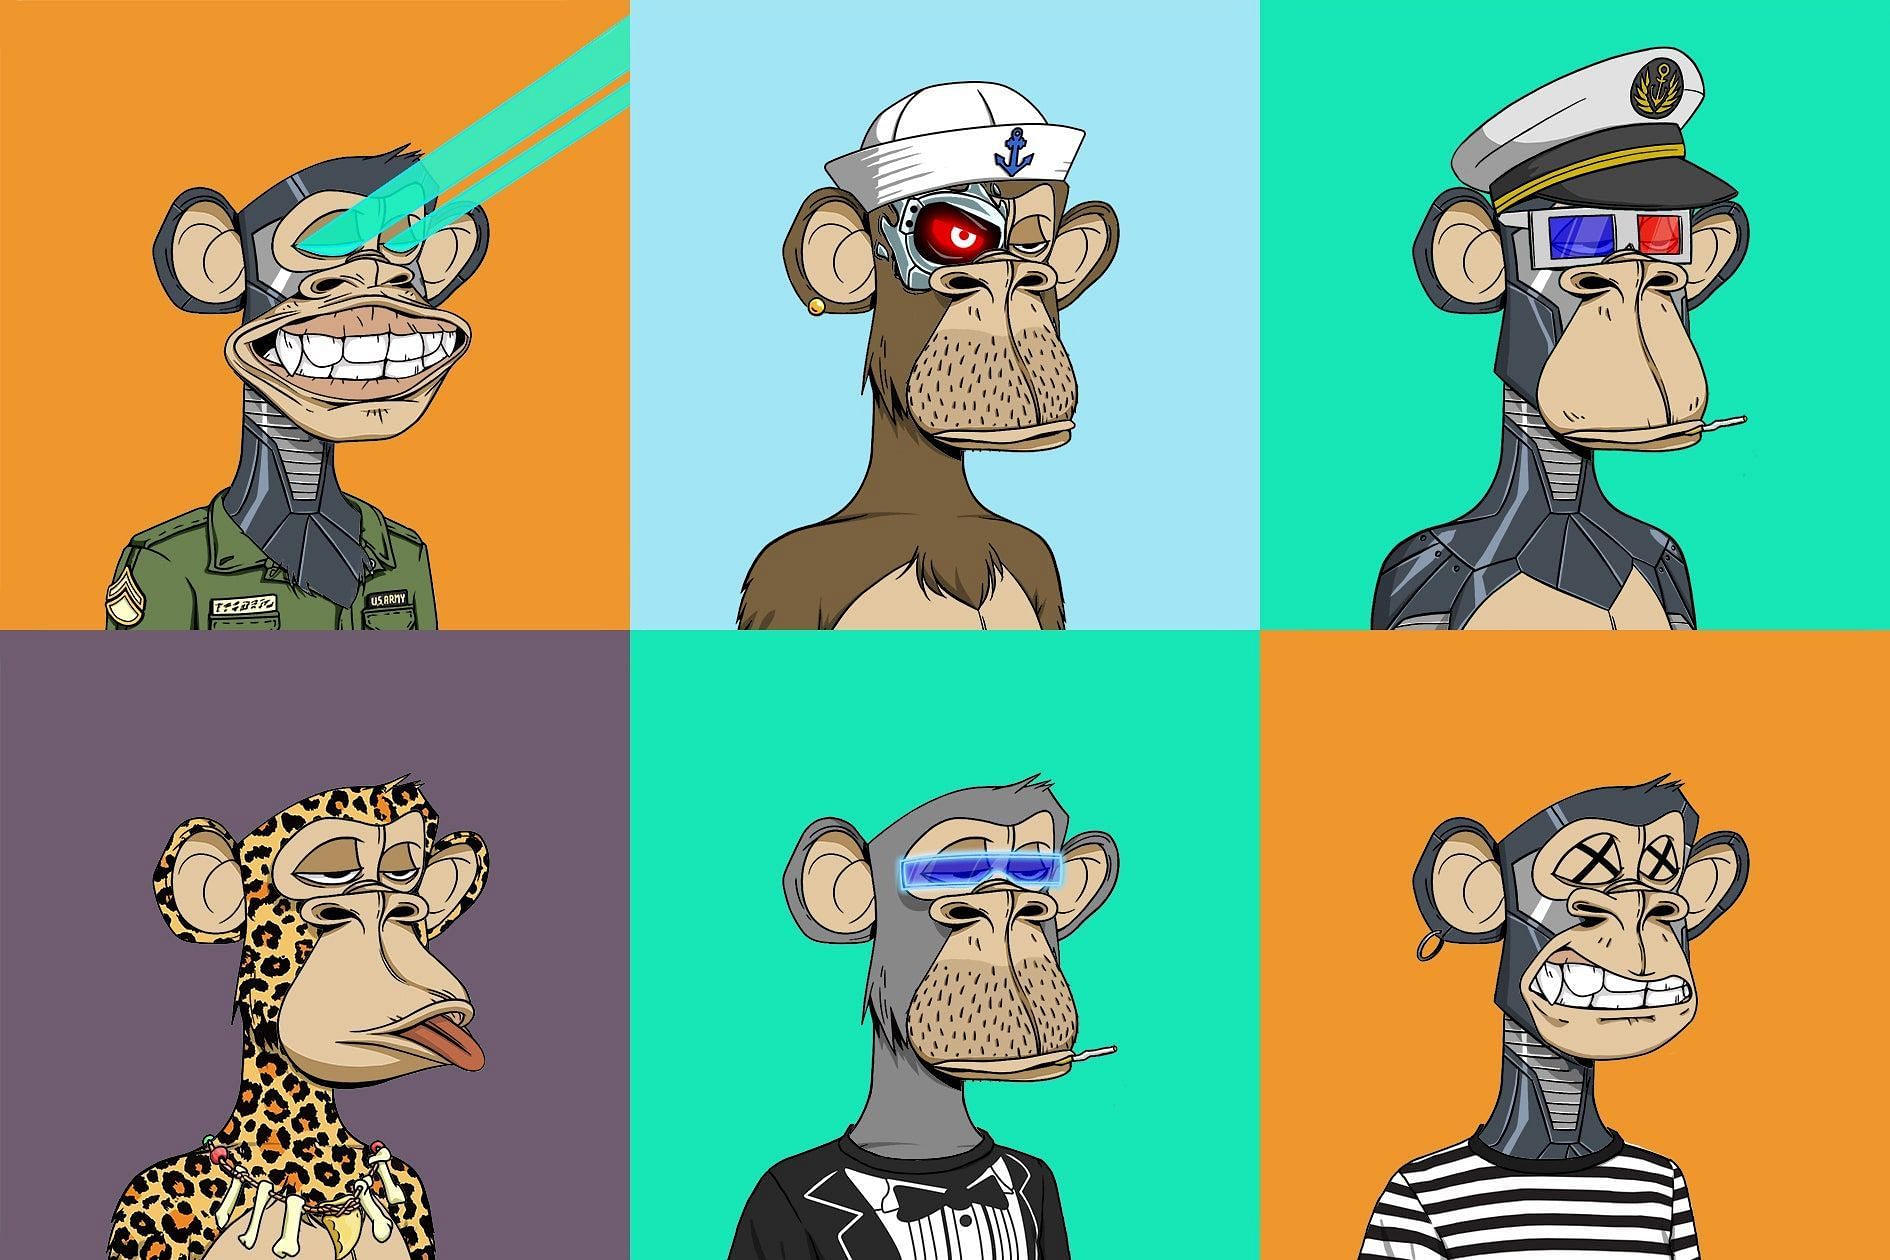 6 out of 10,000 Bored Apes (Image via BAYC)